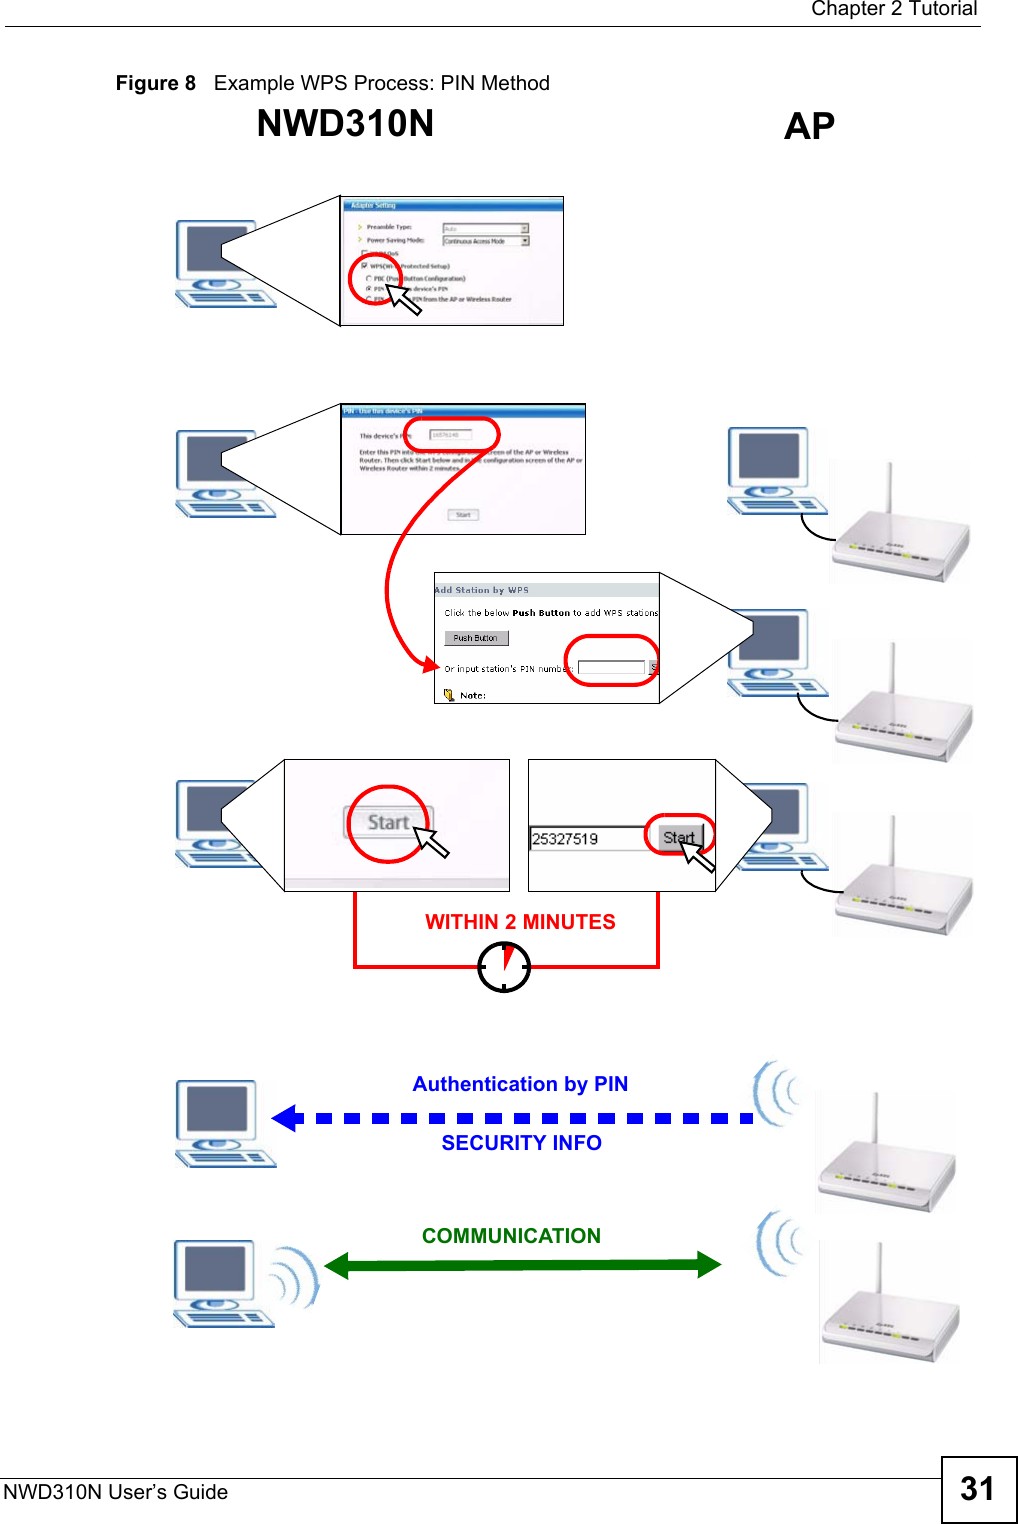  Chapter 2 TutorialNWD310N User’s Guide 31Figure 8   Example WPS Process: PIN MethodAuthentication by PINSECURITY INFOWITHIN 2 MINUTESCOMMUNICATIONNWD310N AP